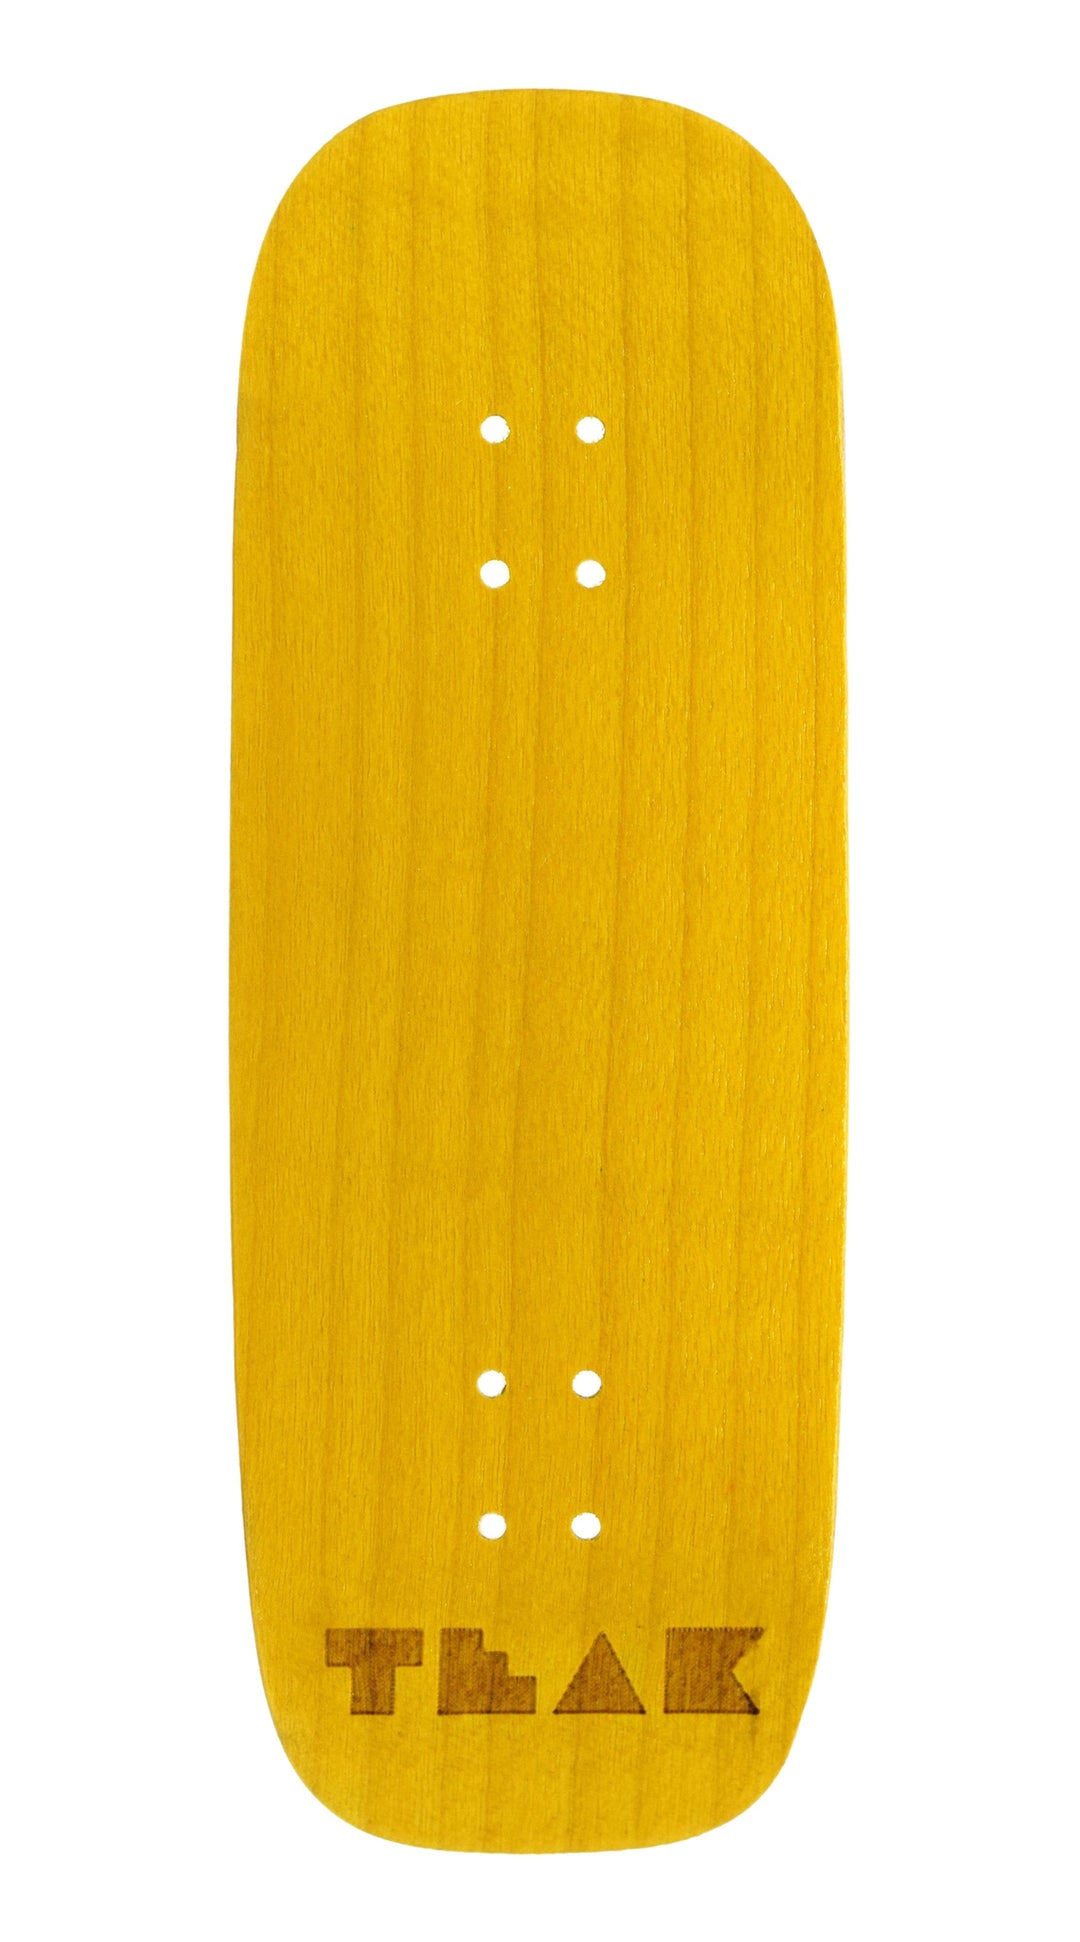 Teak Tuning PROlific Wooden 5 Ply Fingerboard Boxy Deck 32x96mm - Banana Yellow - with Color Matching Mid Ply